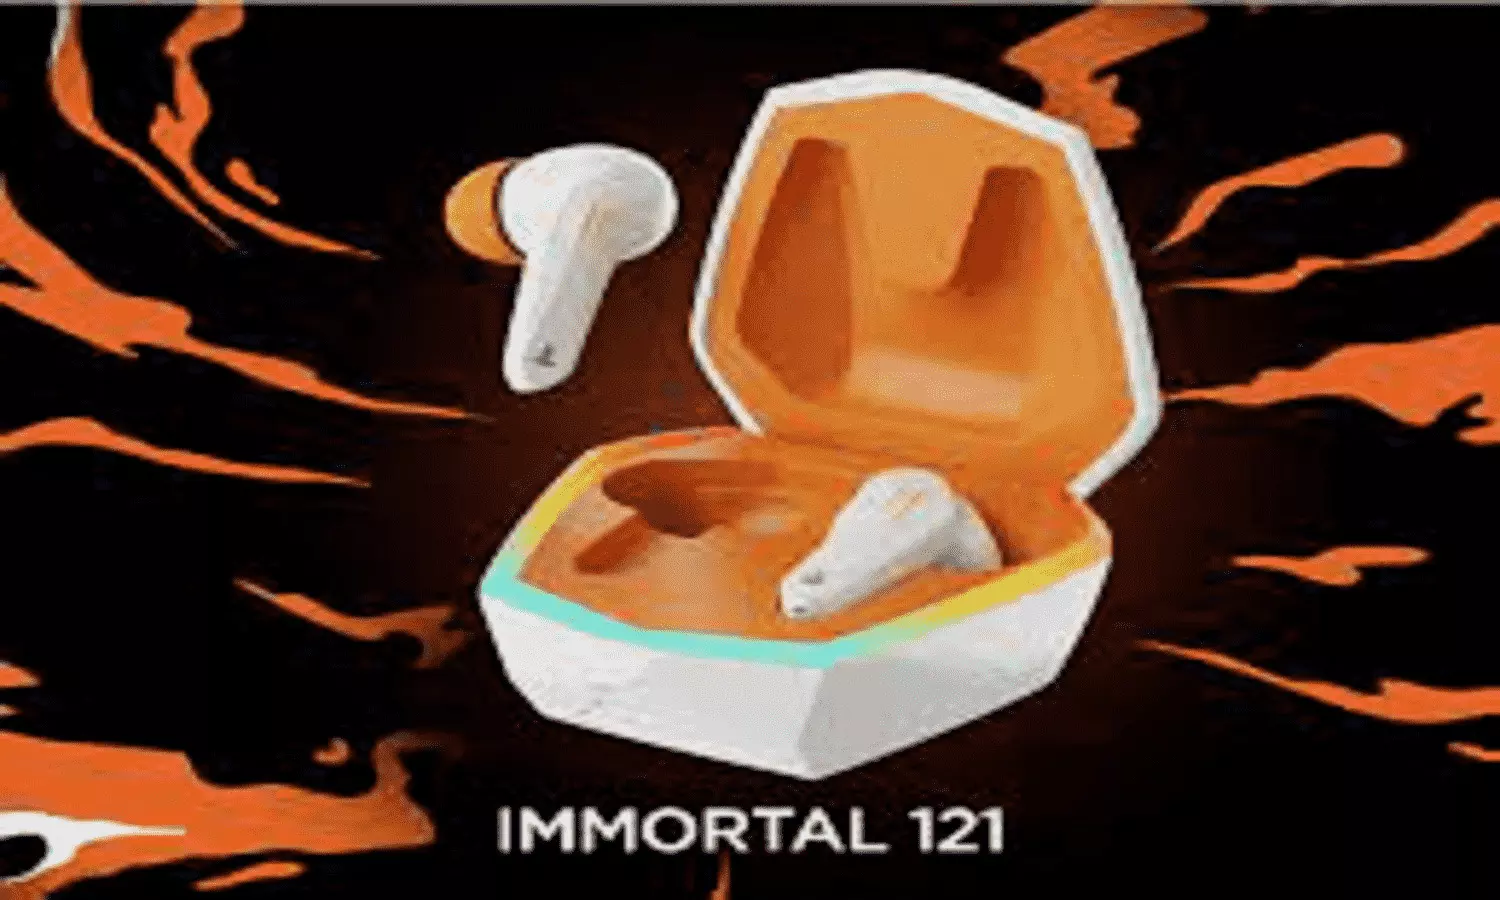 BoAt Immortal 121 Price and Features